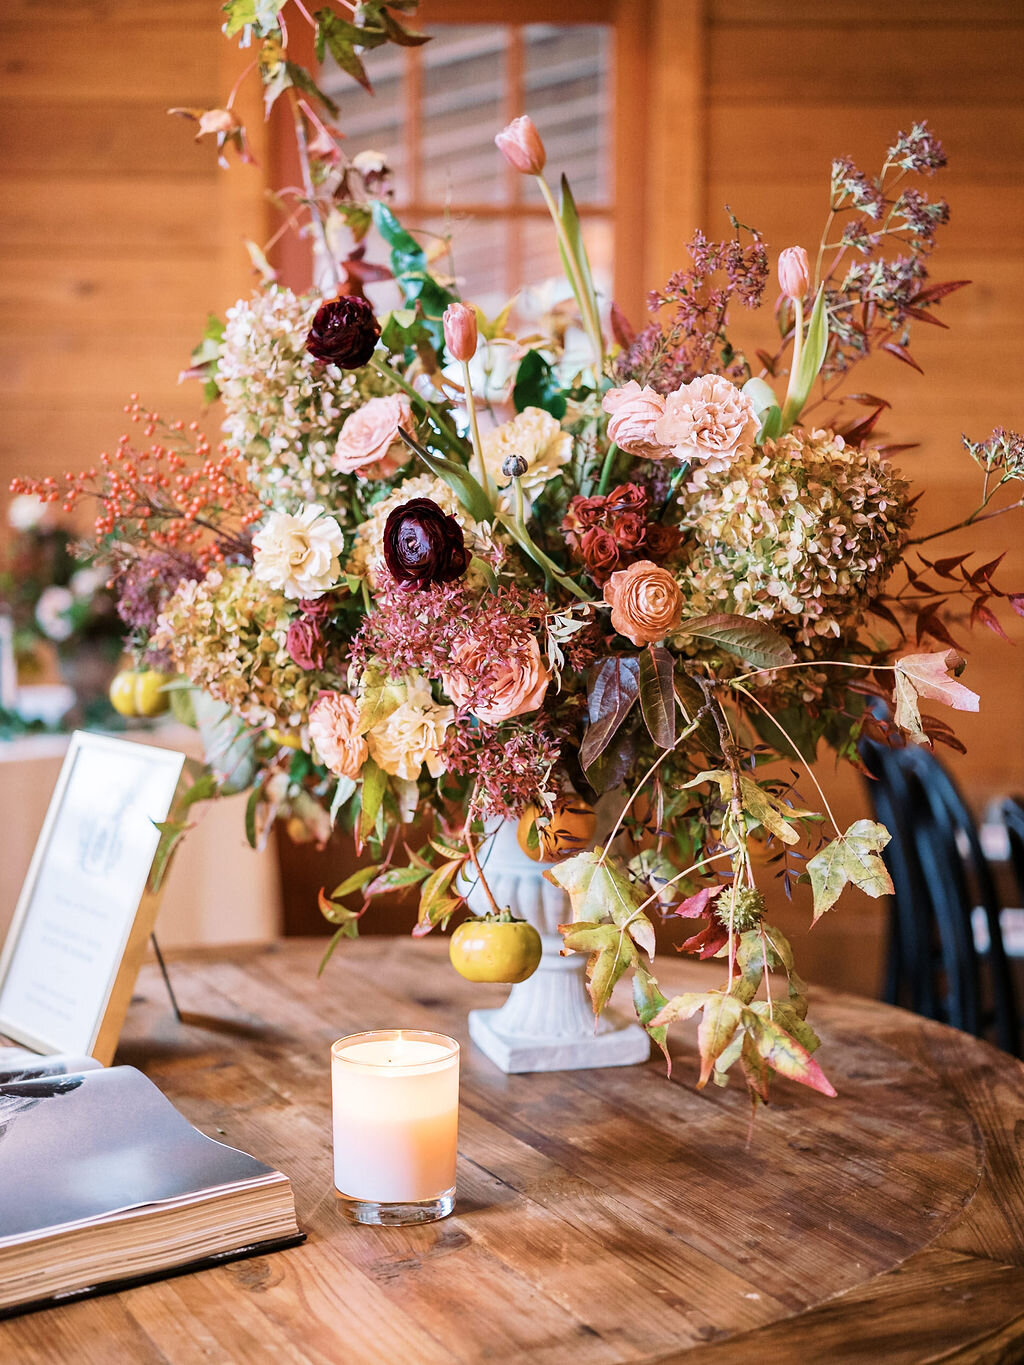 Perfectly muted fall color palette with ivory, dusty rose pink, pops of eggplant, fall leaves, and fruiting persimmon branches. Natural, asymmetrical floral statement arrangement by Nashville florist, Mary Love Richardson of Rosemary & Finch.